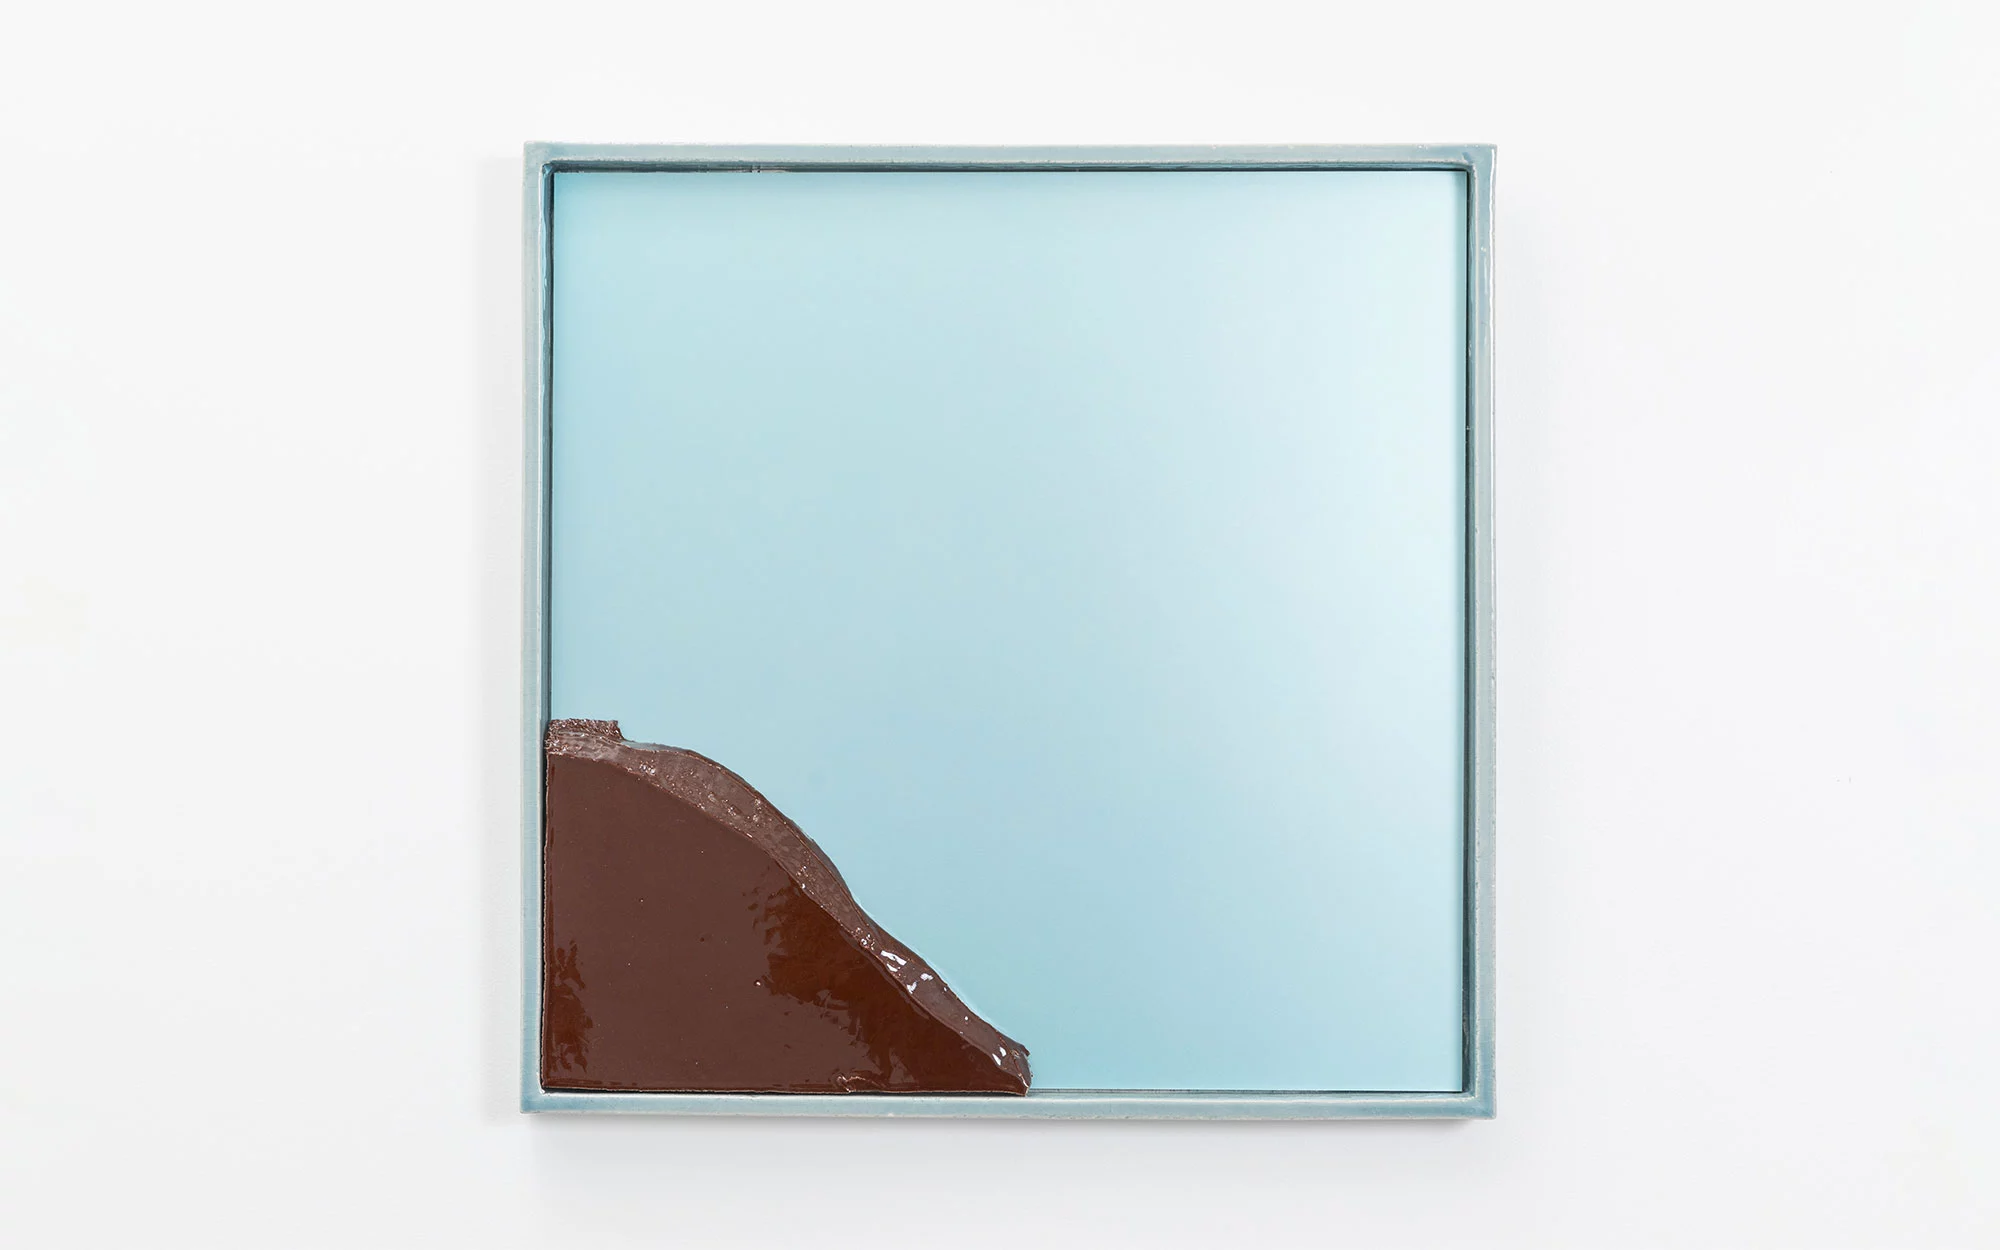 Bas-Relief SQUARE - Ronan Bouroullec - Table - Galerie kreo